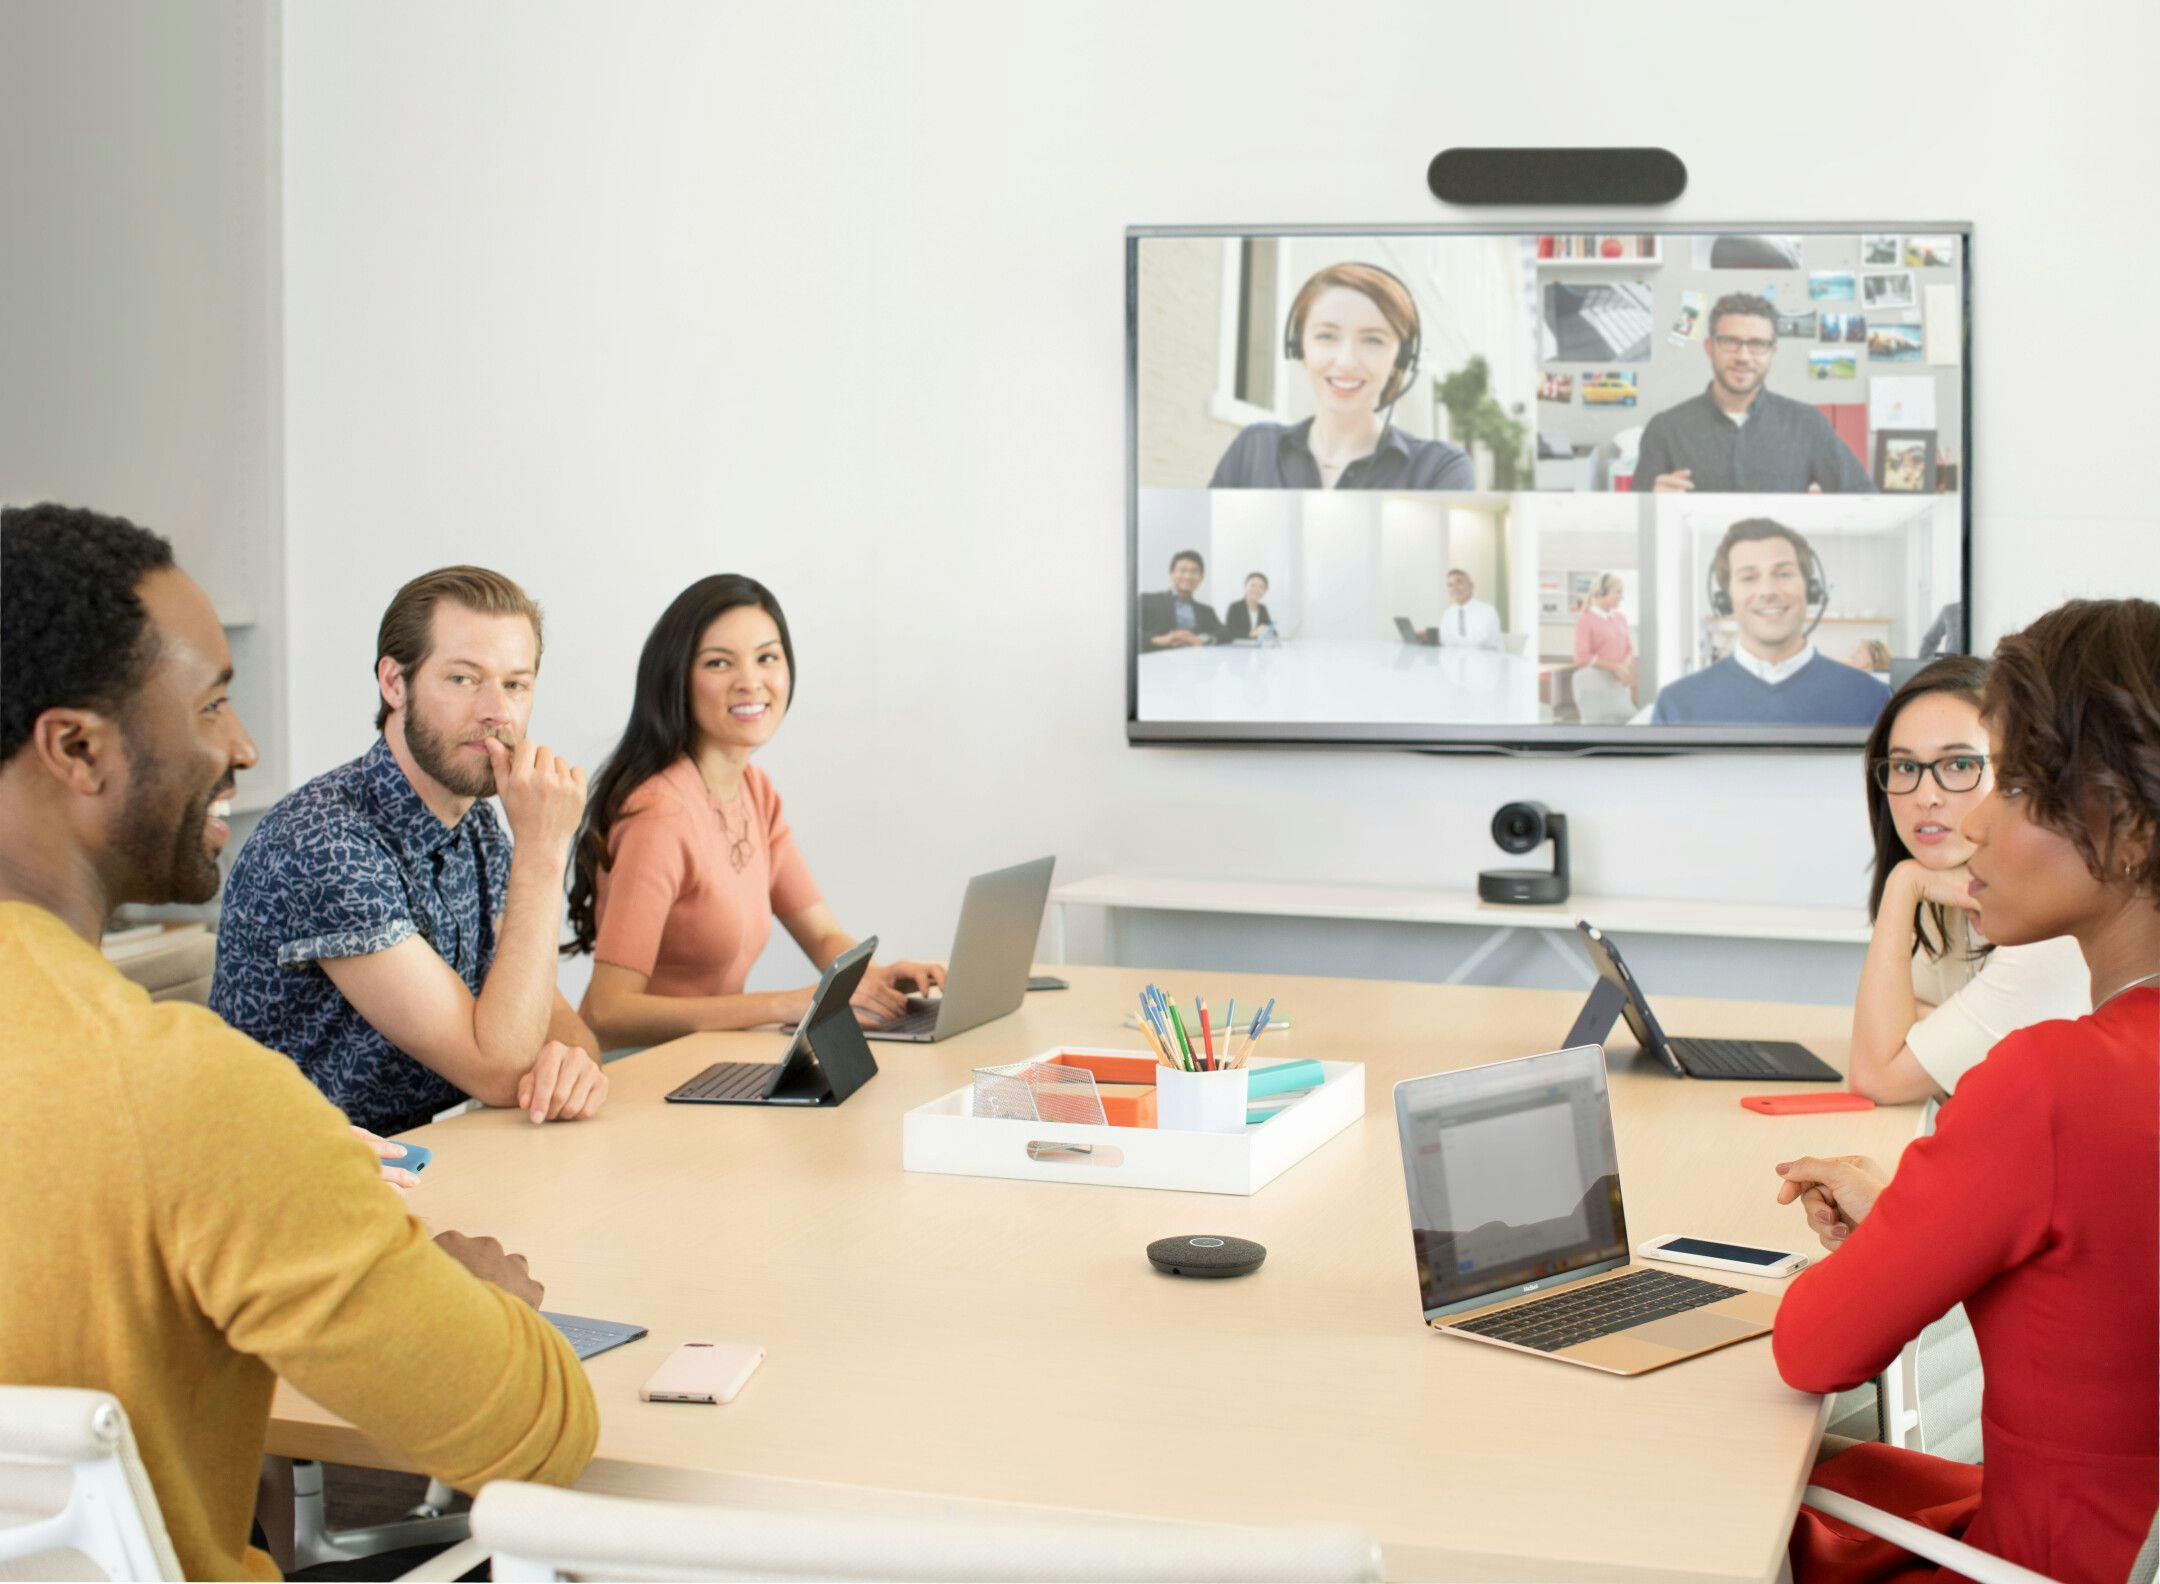 Hybrid meeting office setup with video conferencing